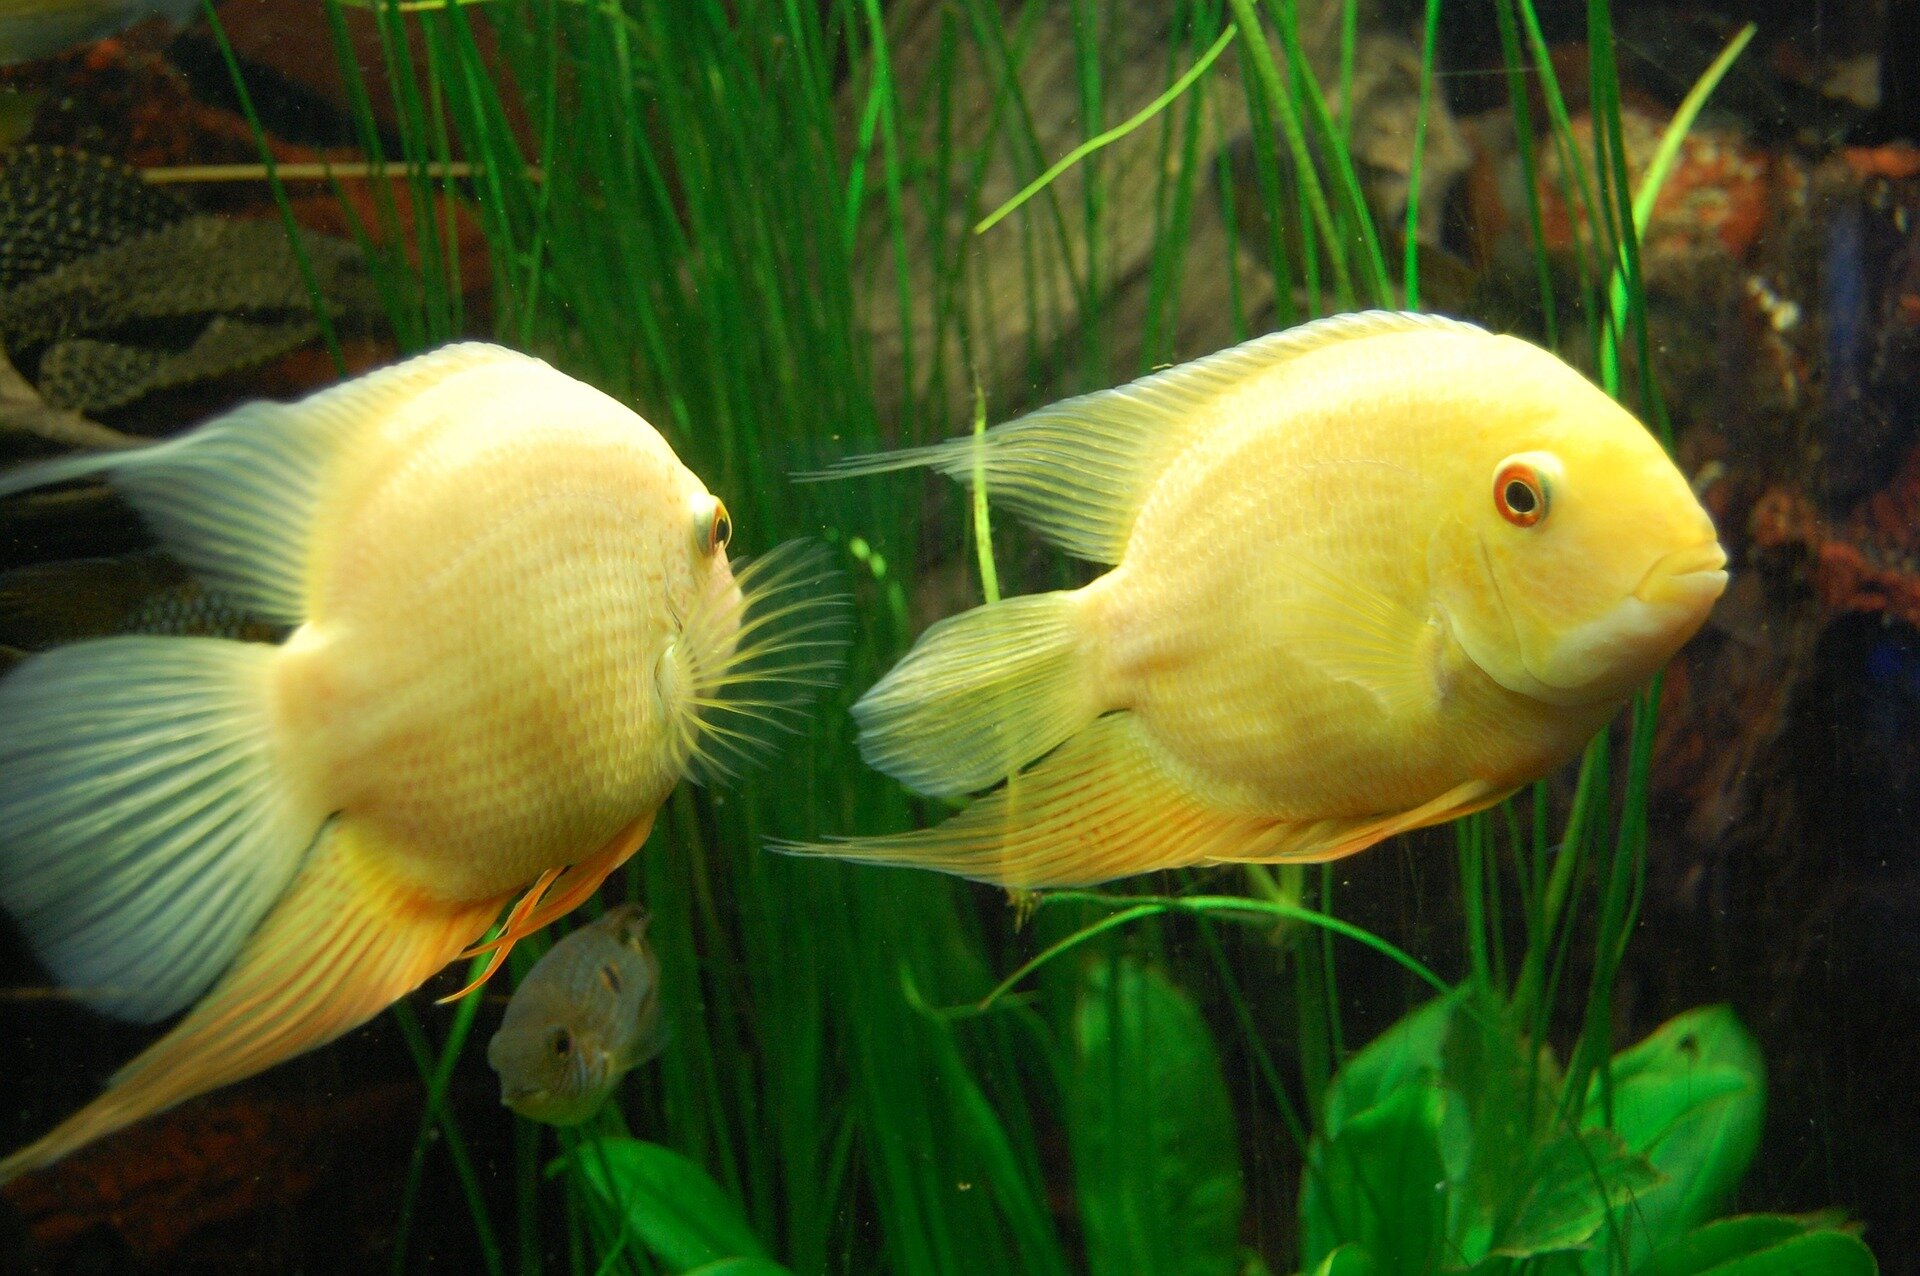 Monogamous fish found to show pessimistic bias when separated from mate